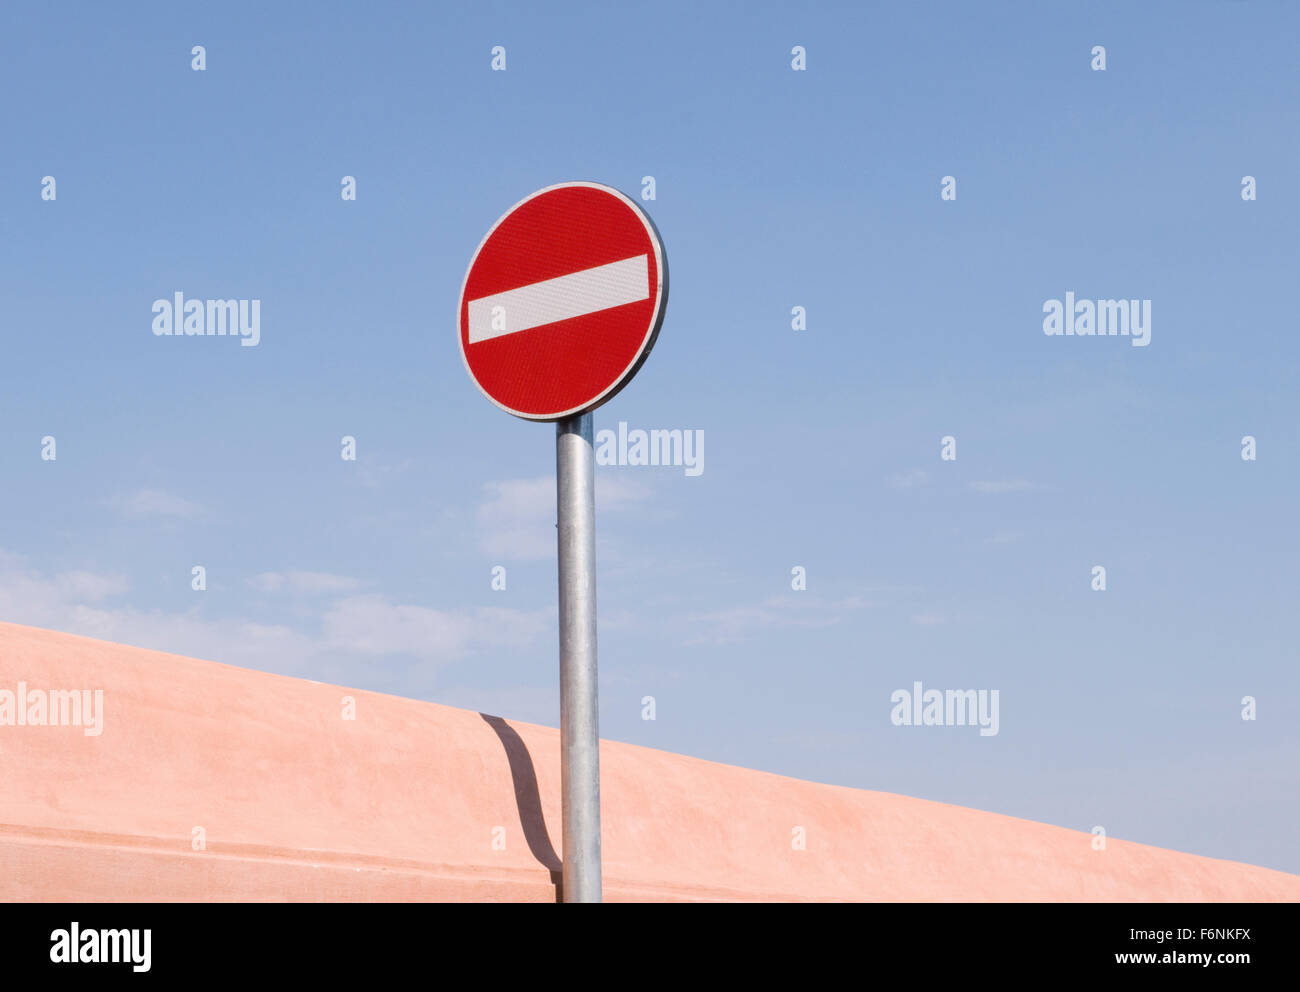 No entry traffic sign Stock Photo